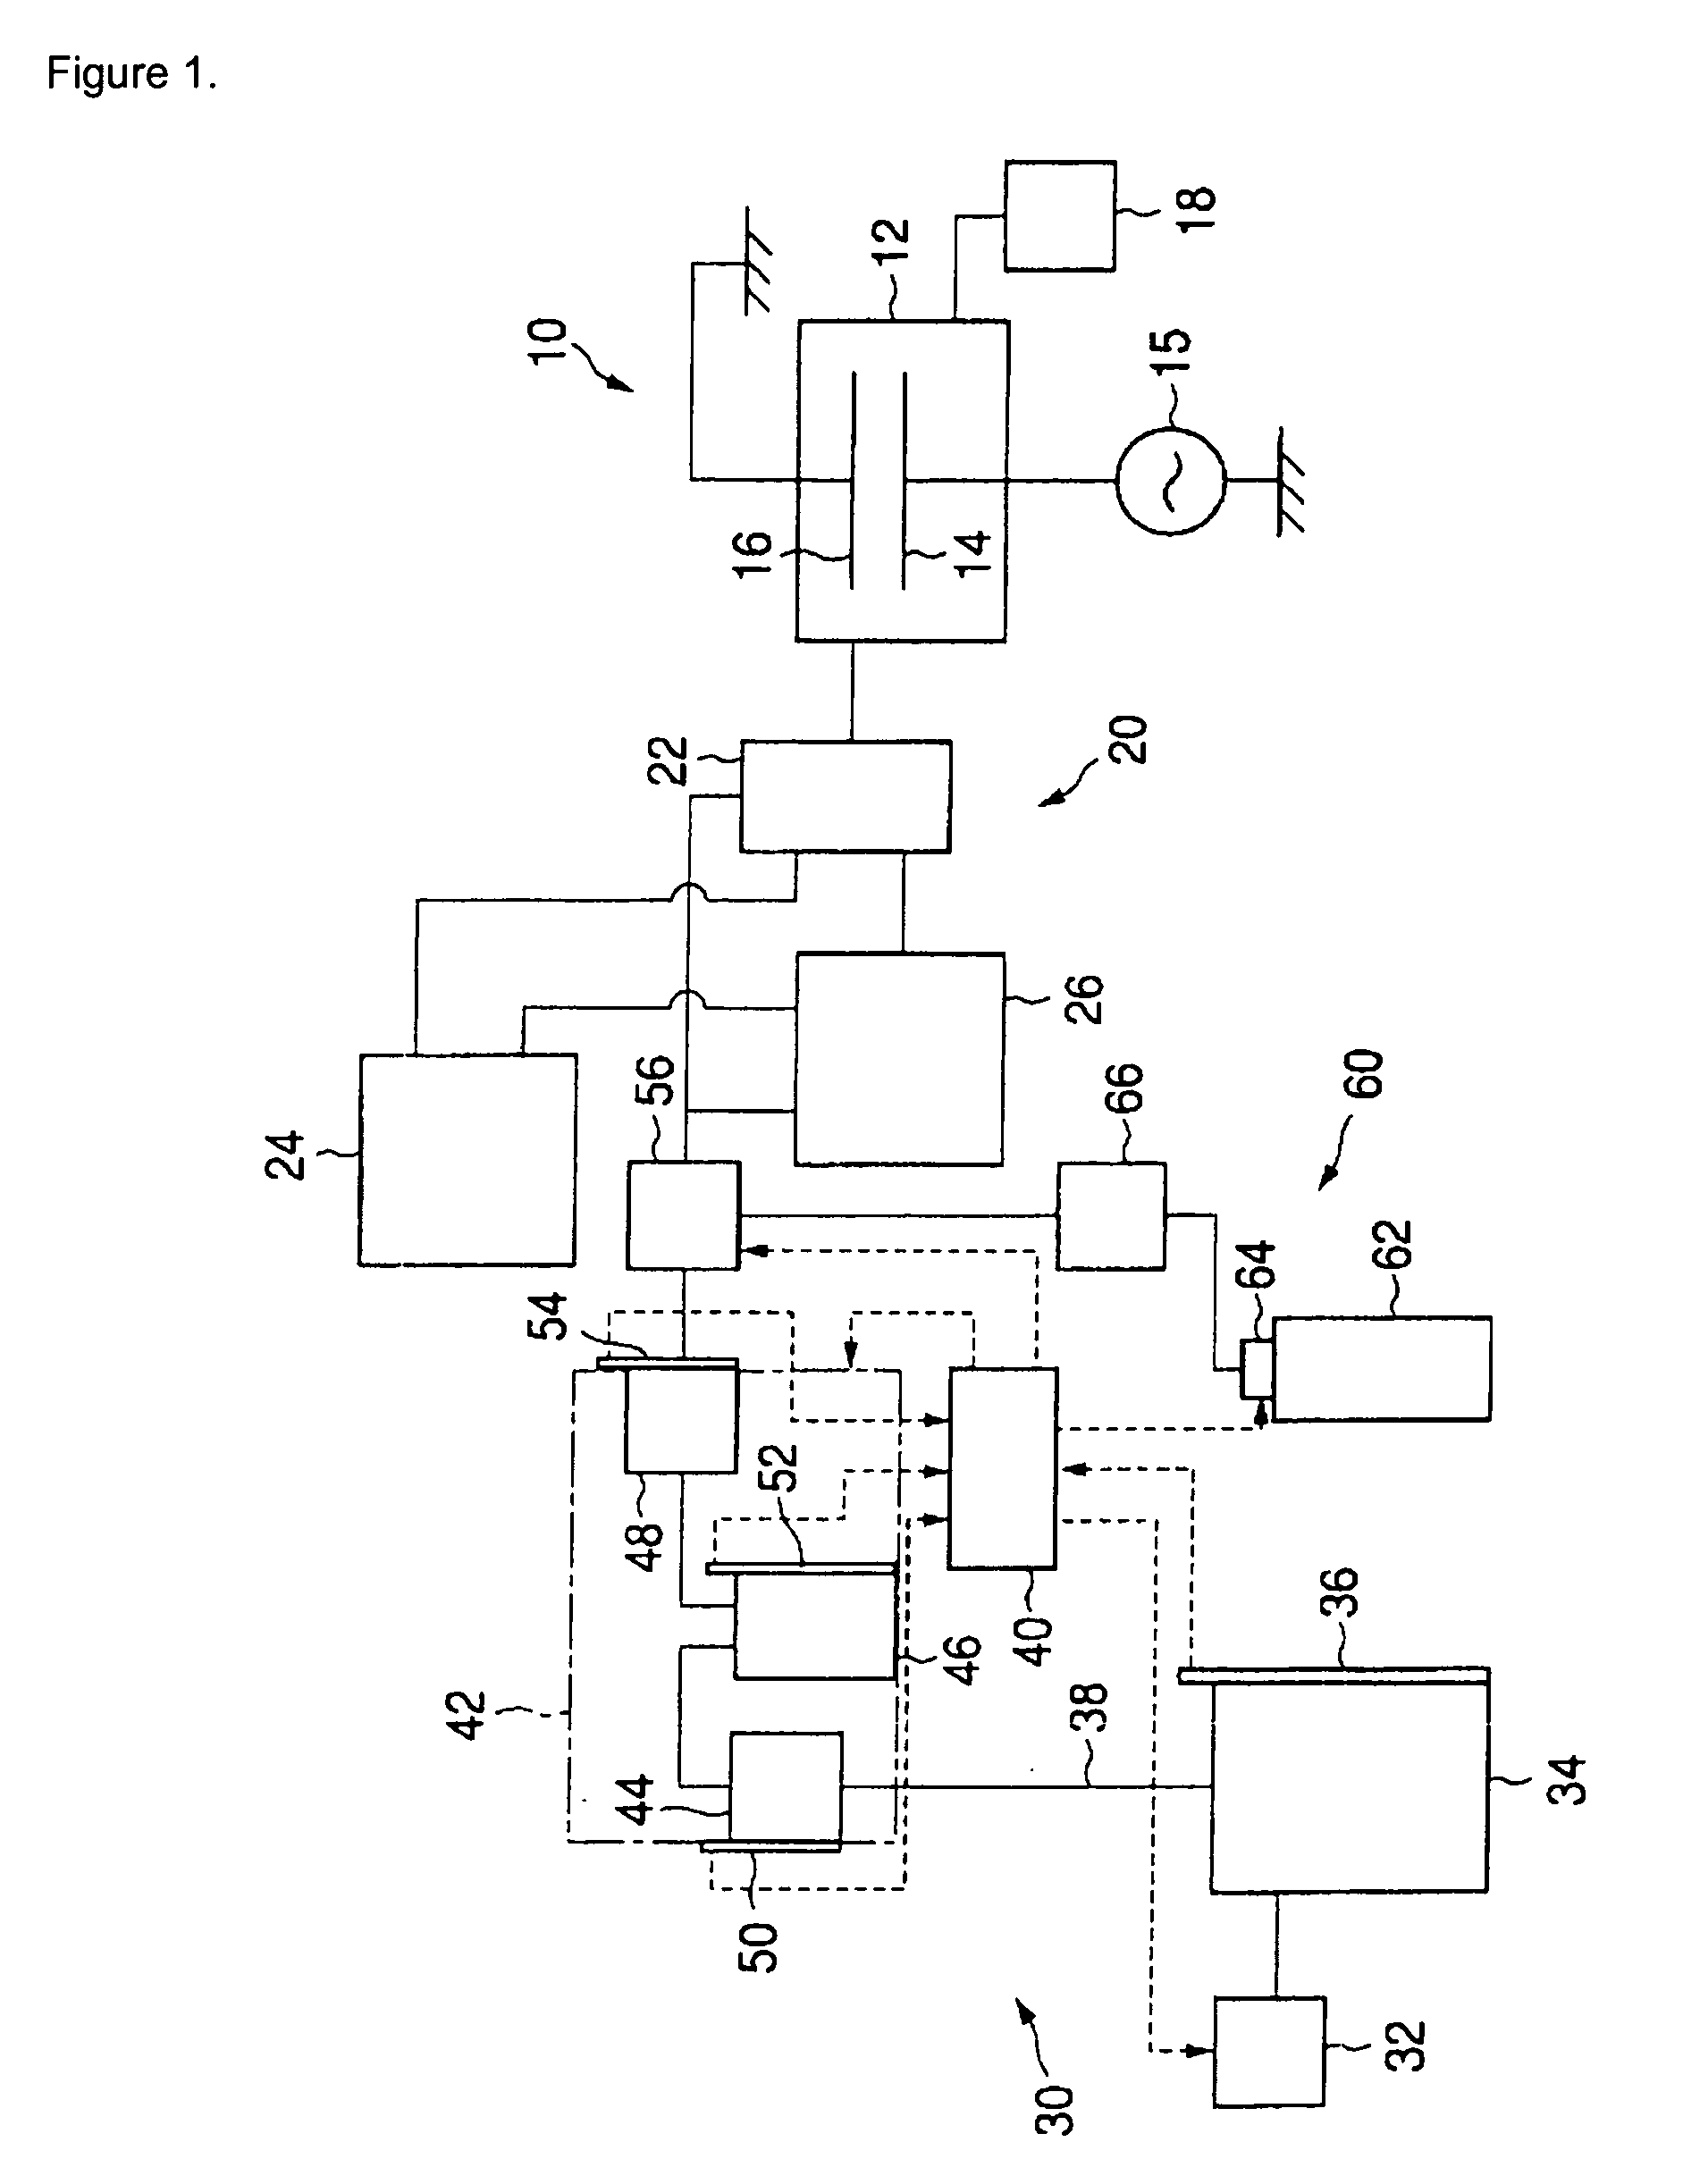 Apparatus for the generation and supply of fluorine gas